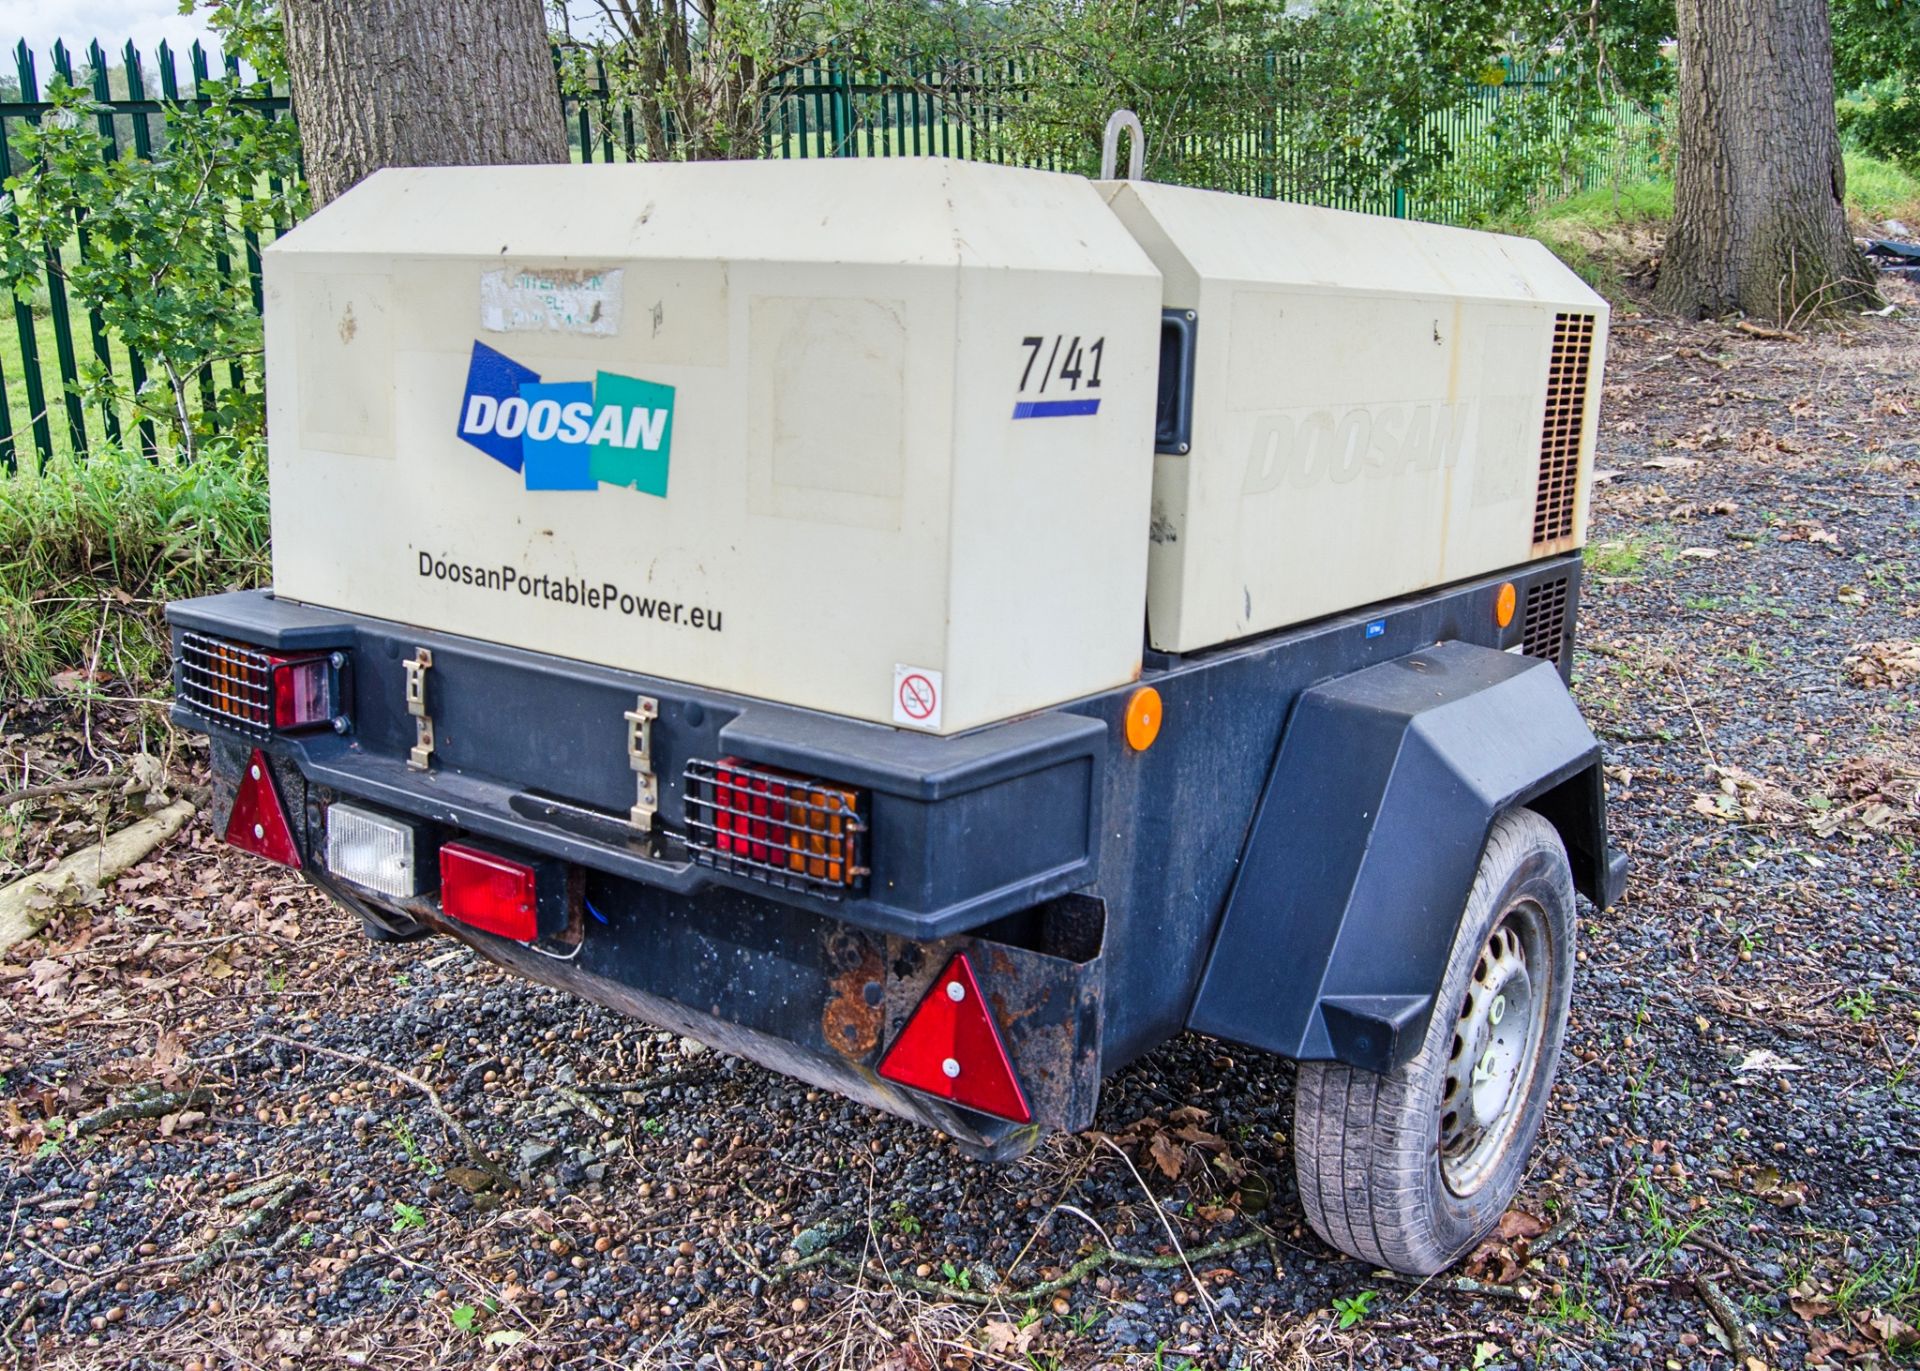 Doosan 741 diesel driven fast tow mobile air compressor Year: 2015 S/N: 433751 Recorded hours: 622 - Image 2 of 7